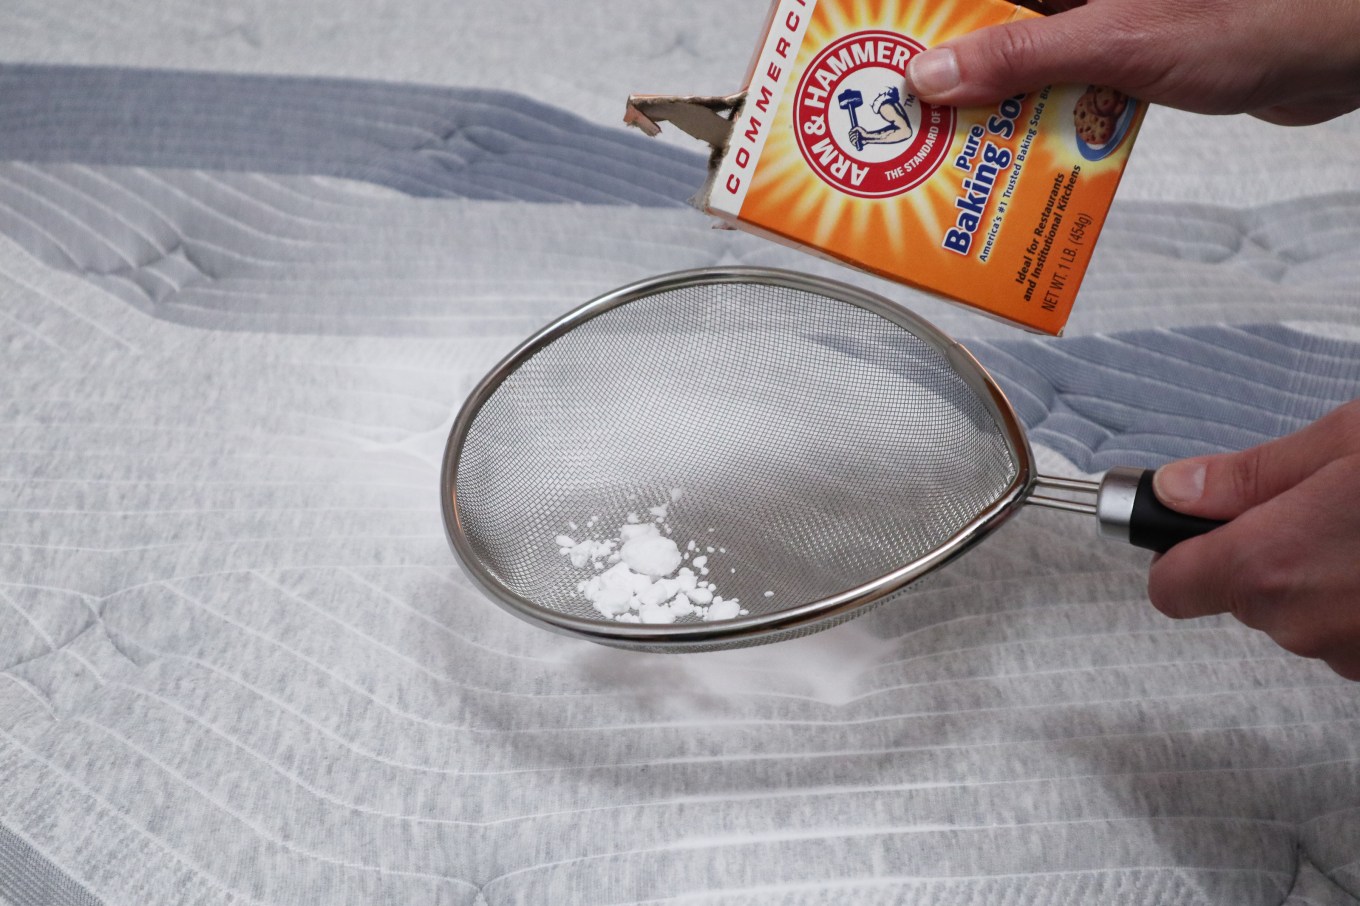 A bed being cleaned with baking soda in a sifter.